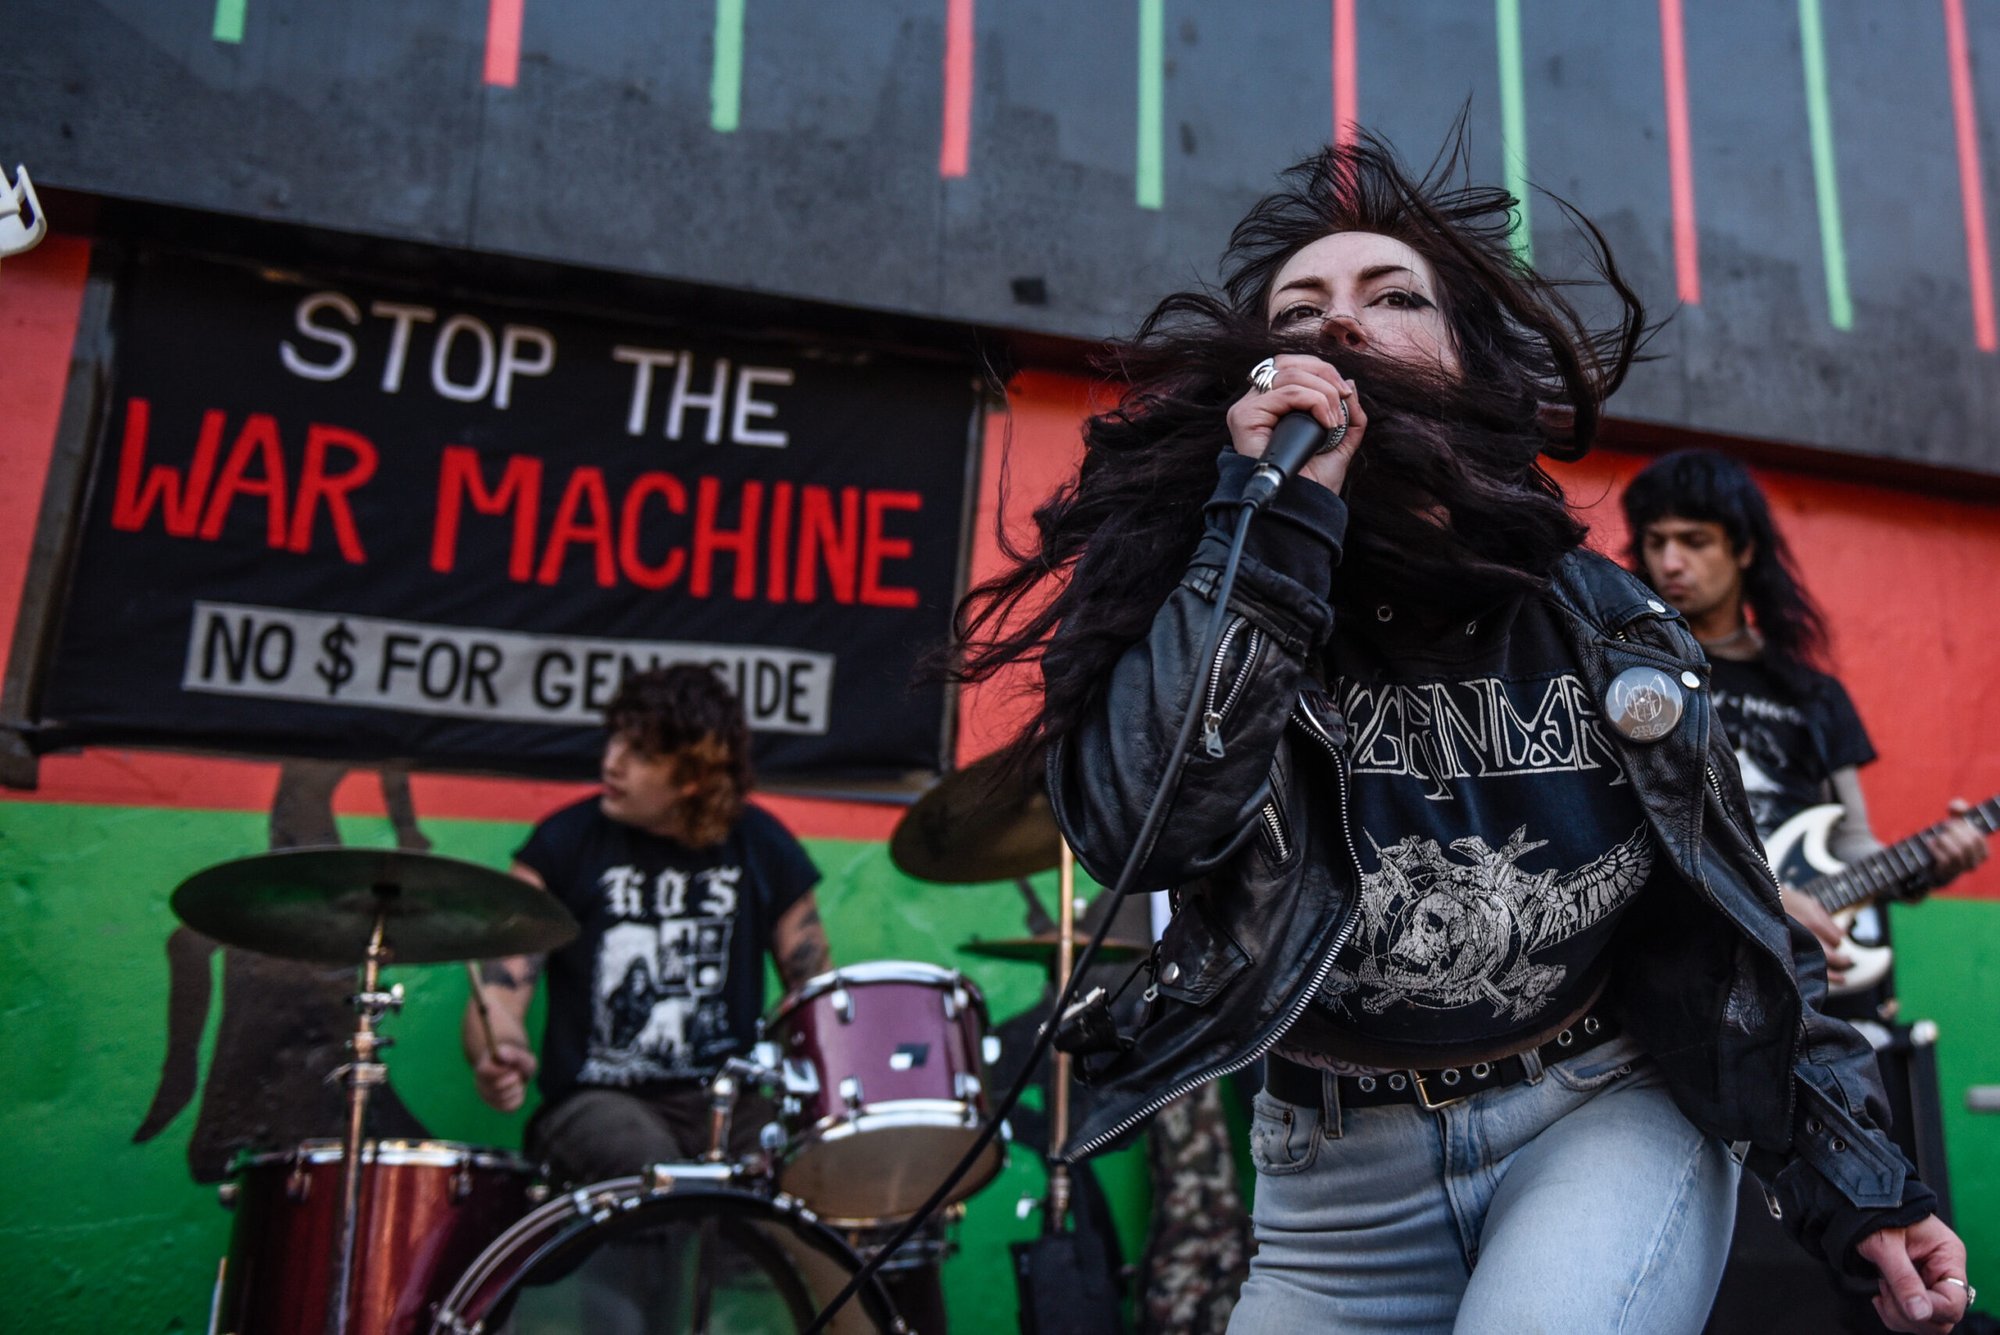 The band Cross plays as people attend a hard core punk concert in support of Palestine at the Herbert Von King Park in the Bedford-Stuyvesant neighborhood in the Brooklyn borough in New York City.